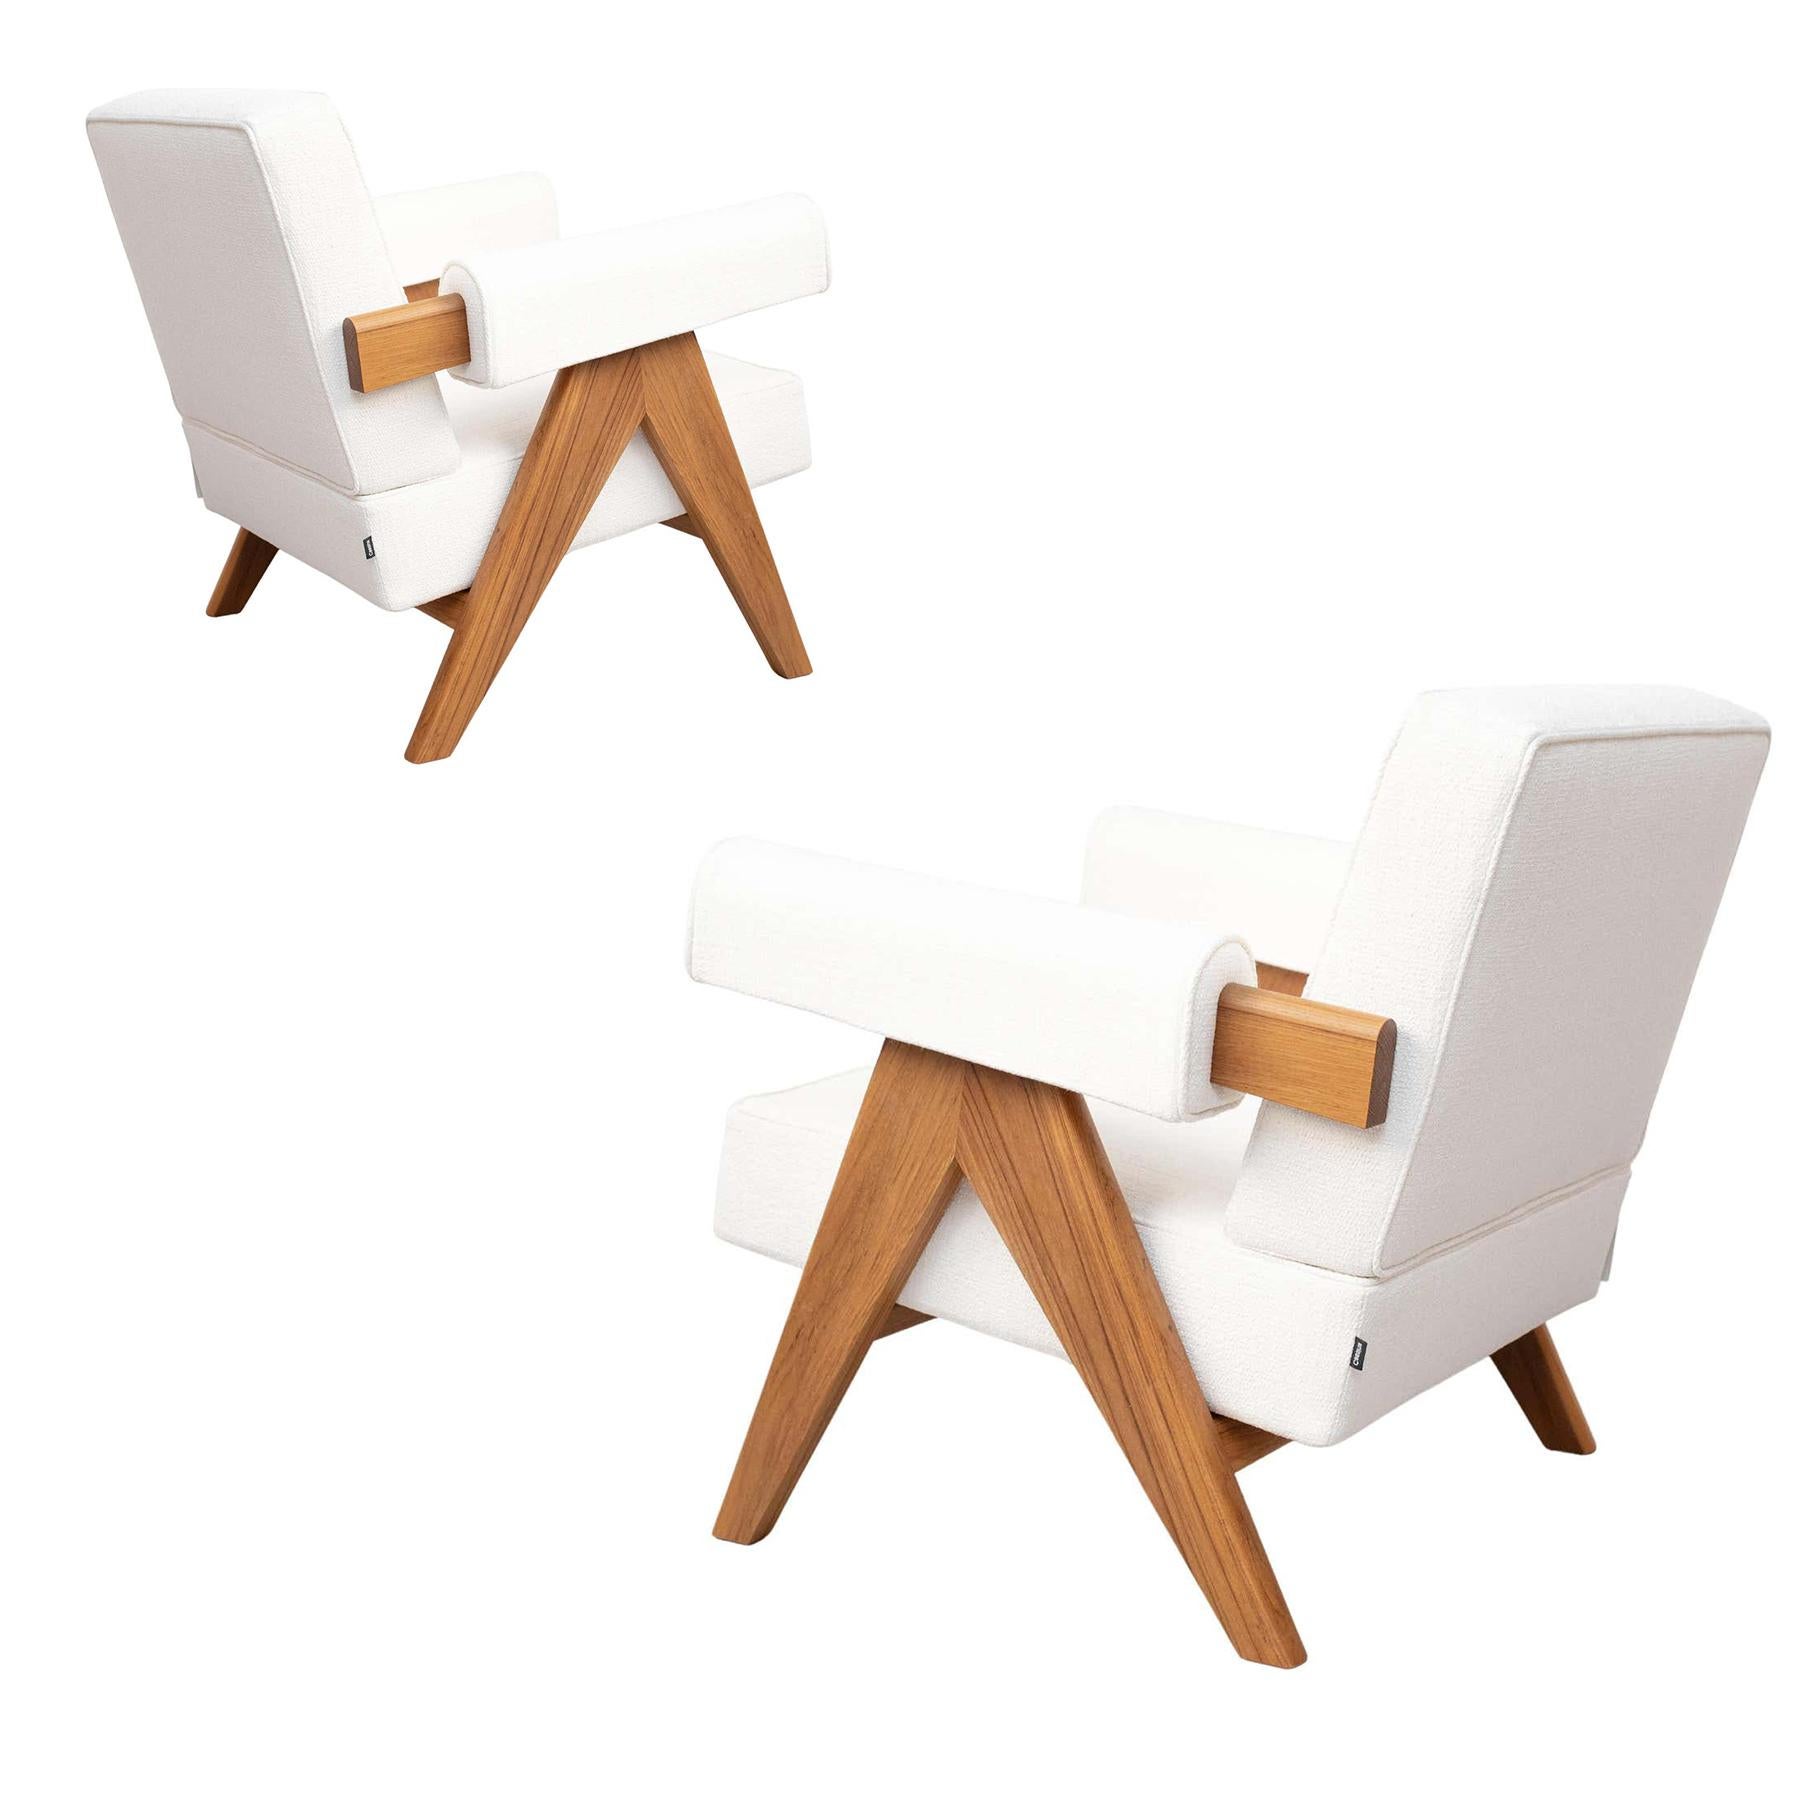 Set of Two Armchairs designed by Pierre Jeanneret circa 1950, relaunched in 2019.
Manufactured by Cassina in Italy.

Included in UNESCO’s 2016 Cultural Heritage list, the extraordinary architecture of Le Corbusier’s Capitol Complex, designed by